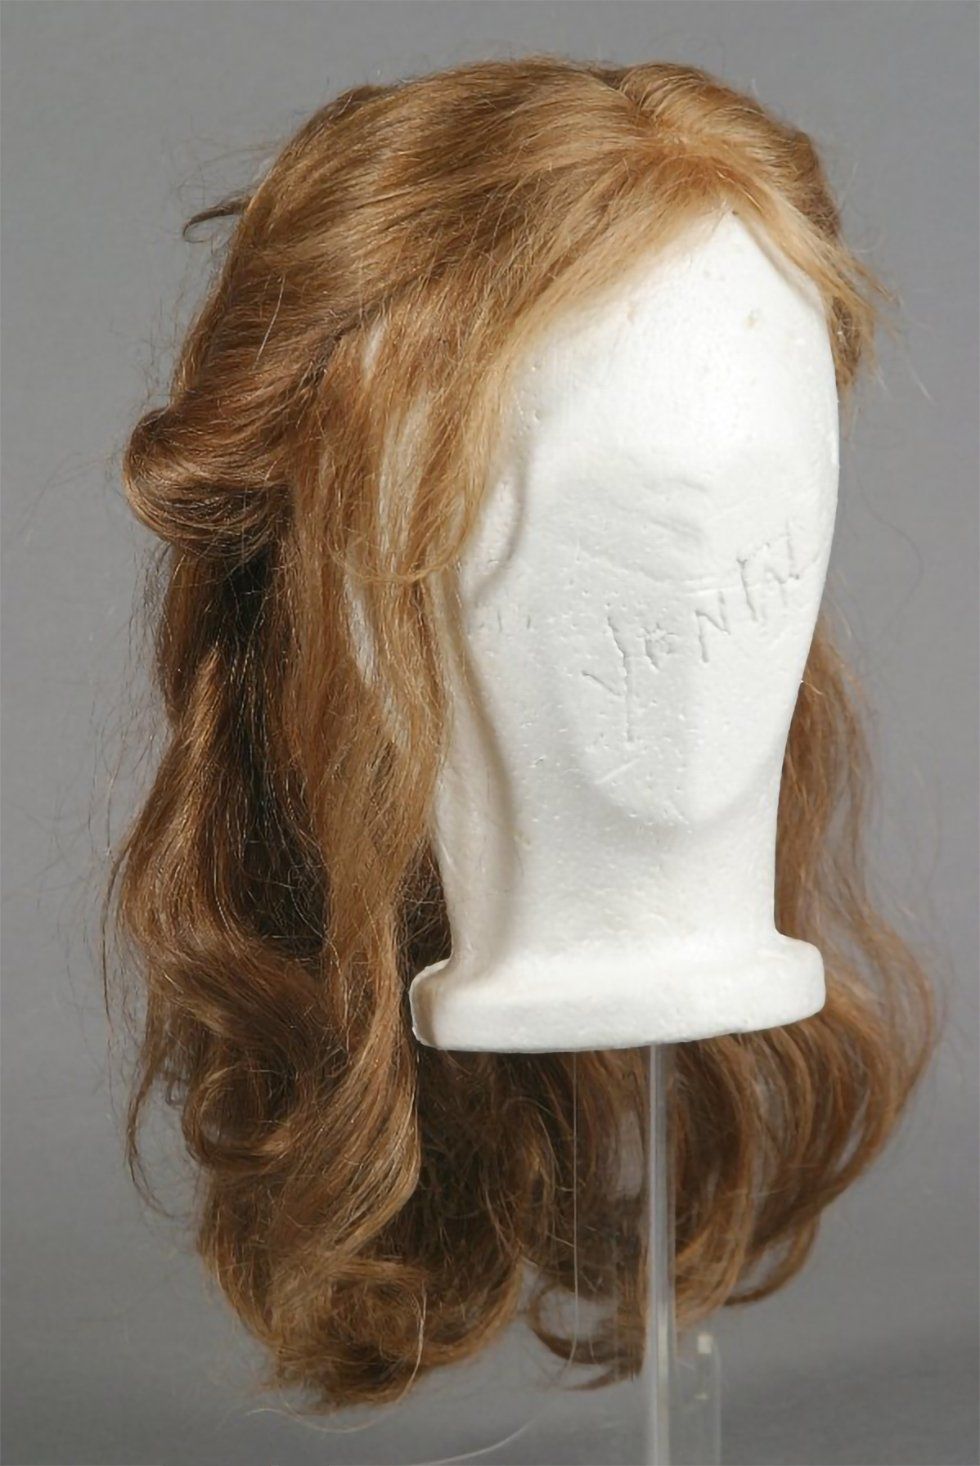 A wig for Yentl